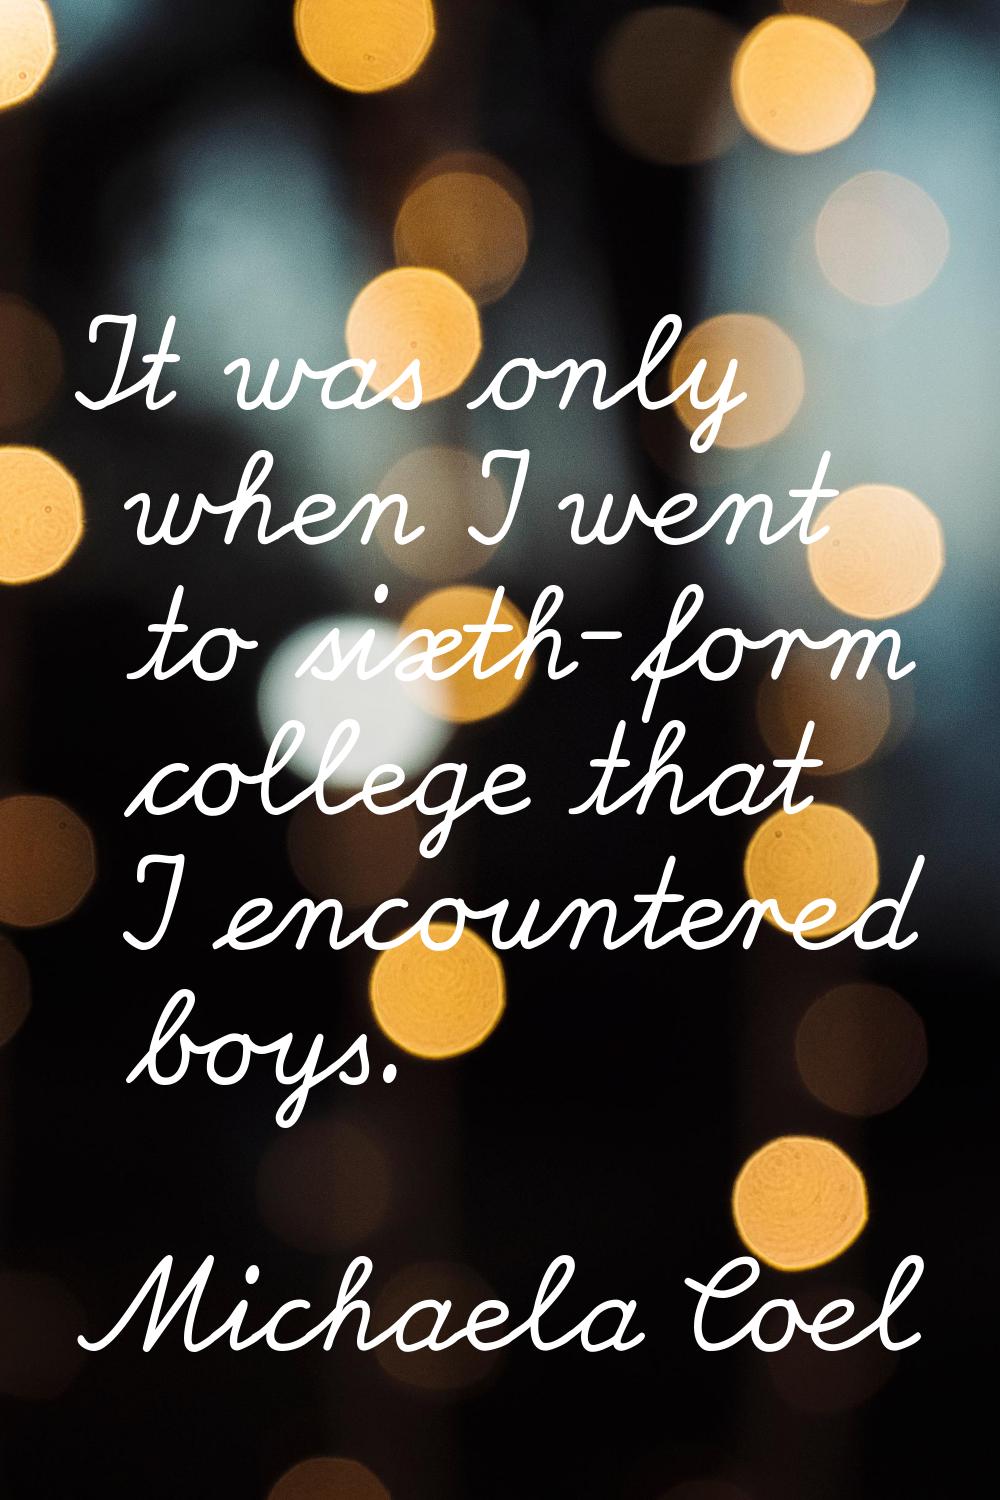 It was only when I went to sixth-form college that I encountered boys.